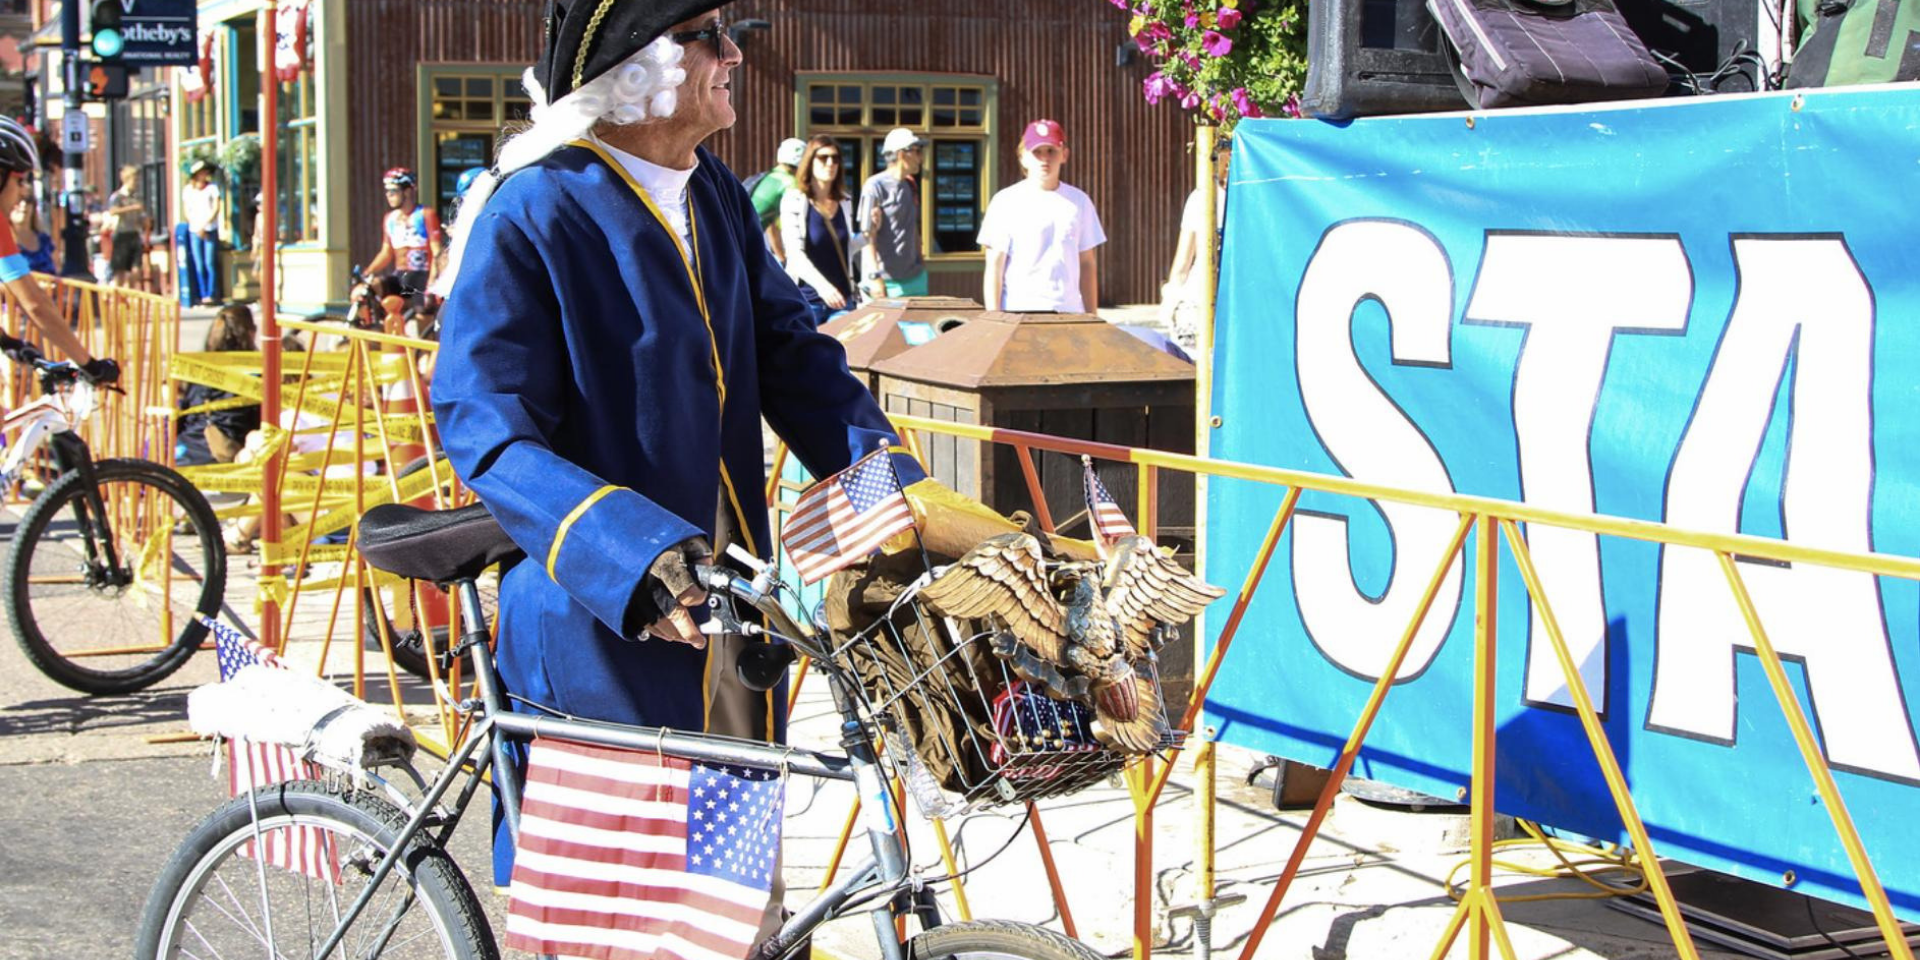 Man in American patriotic clothing on a bicycle